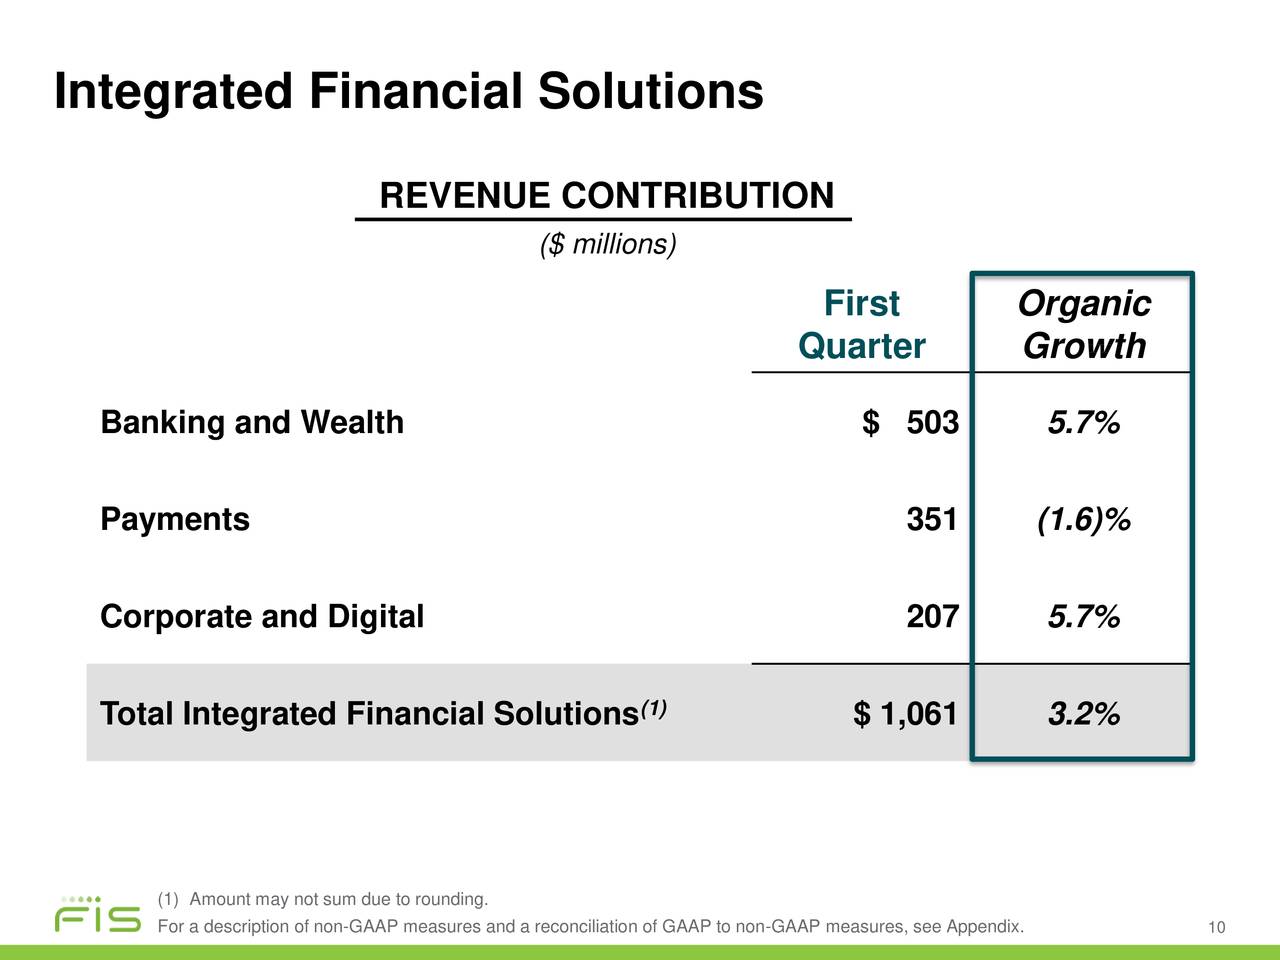 Integrated Financial Solutions